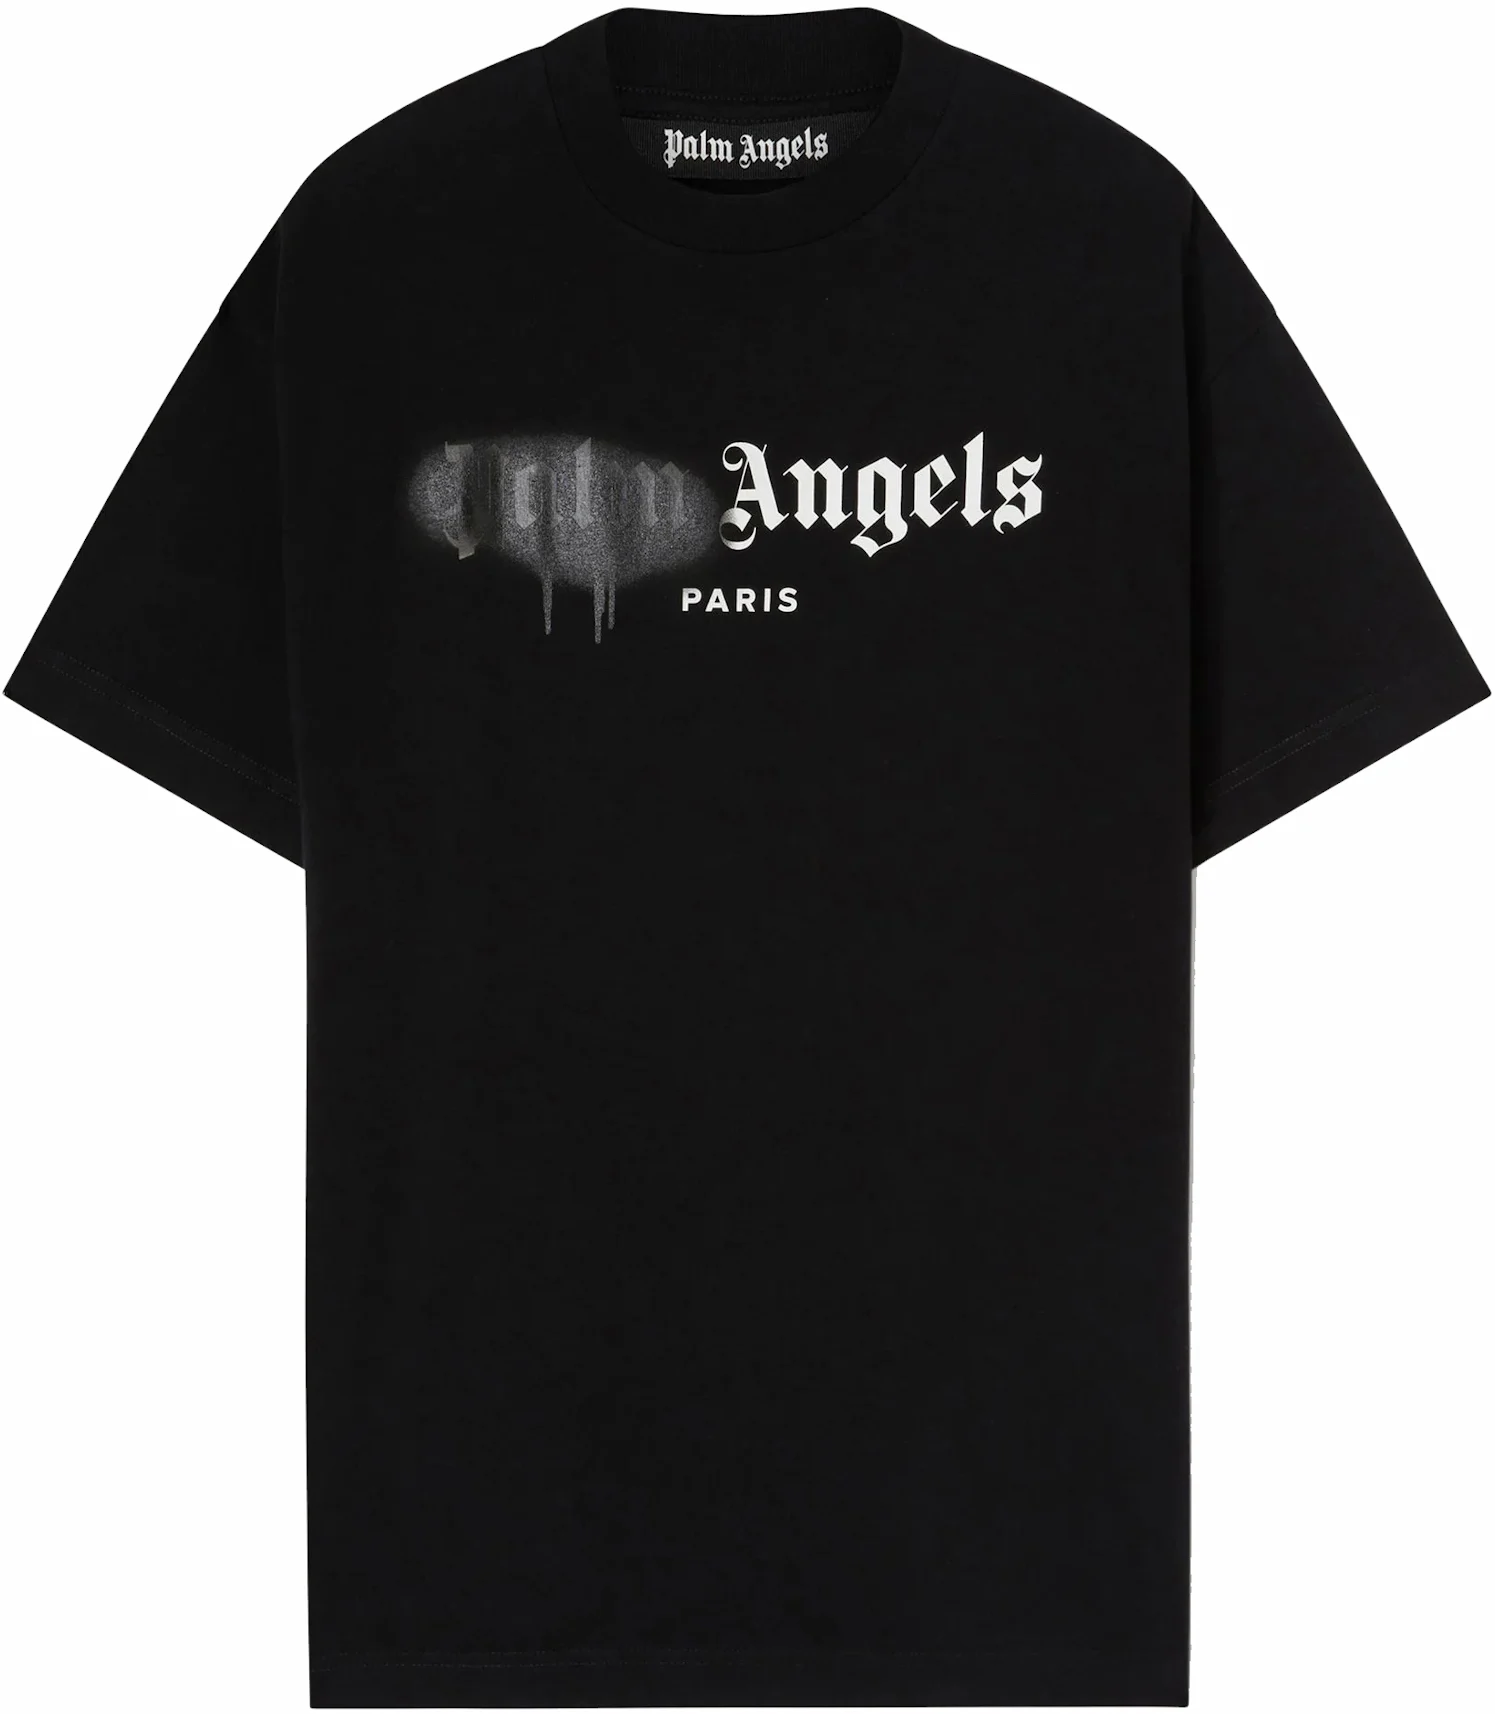 MONOGRAMM SPRAY CITY T-SHIRT LOS ANGELS - Palm Angels® Official